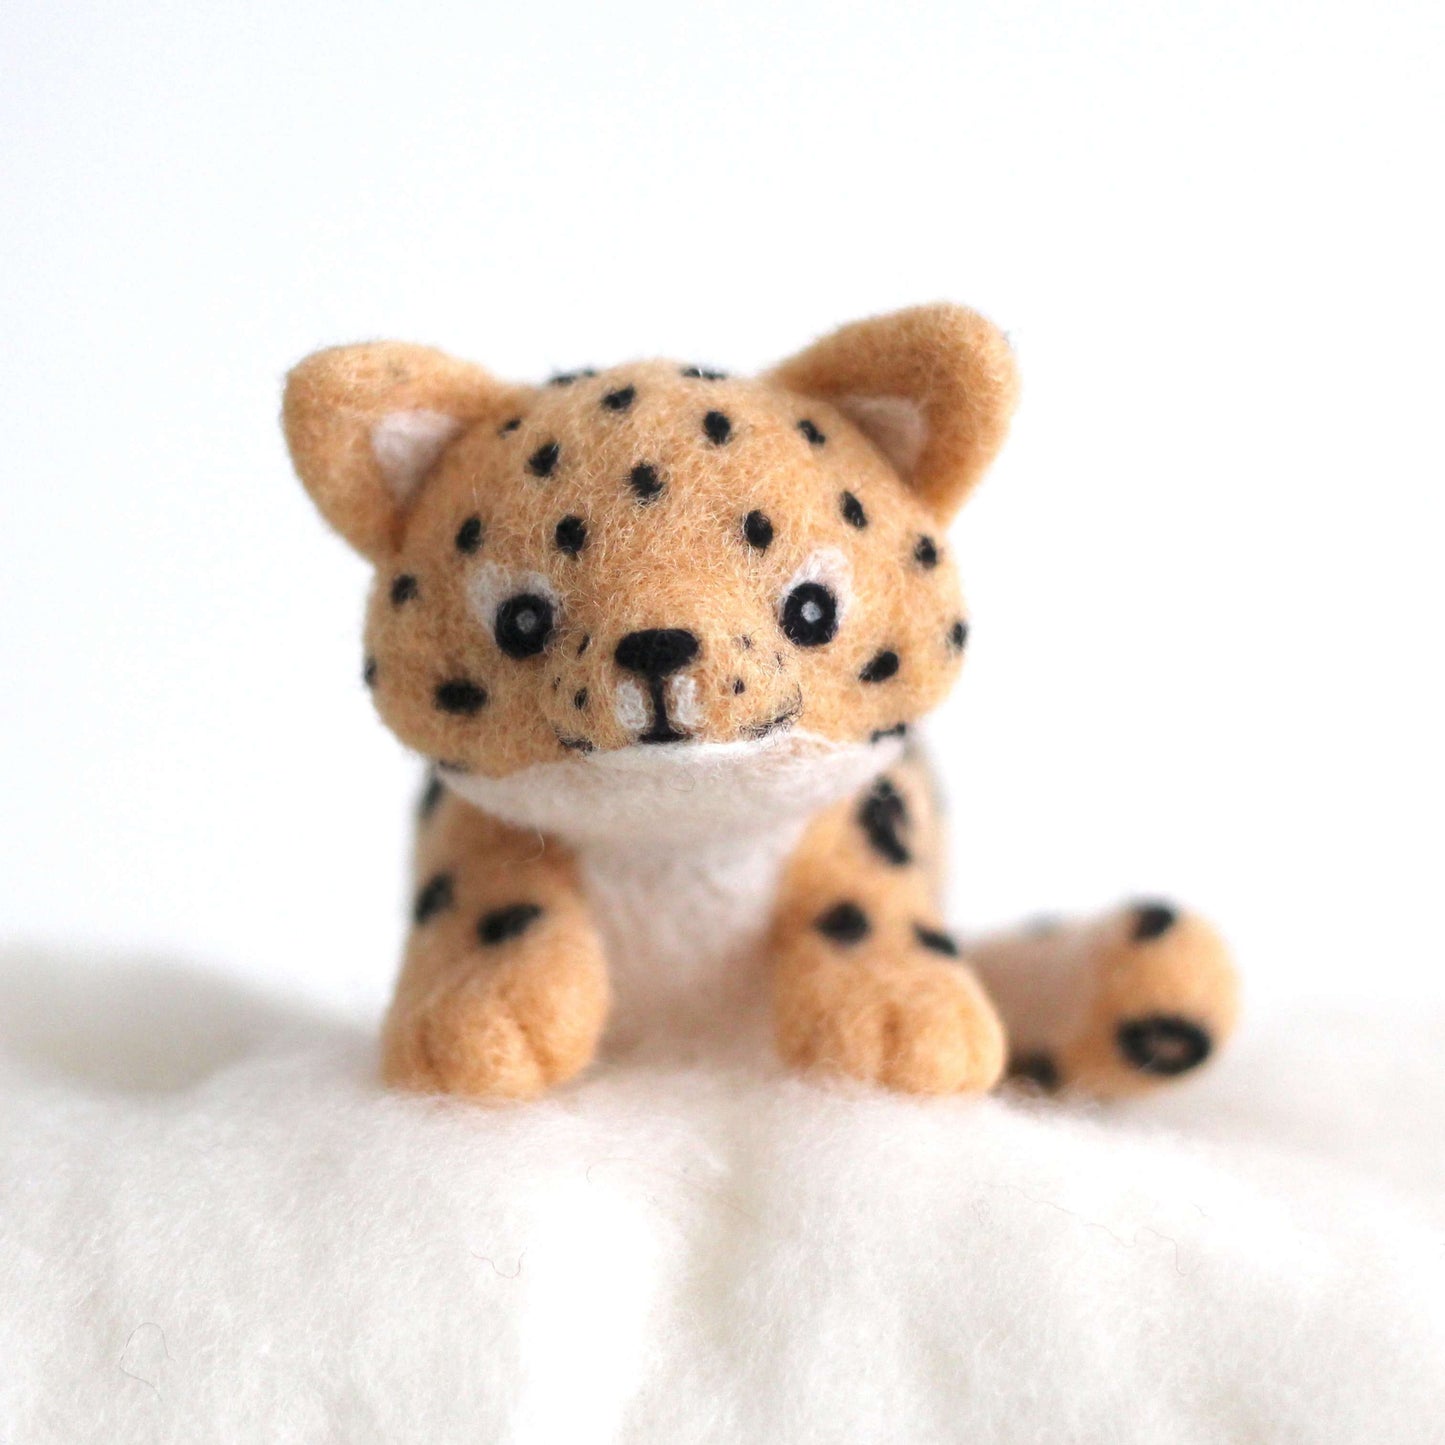 Needle Felted Amur Leopard Cub by Wild Whimsy Woolies